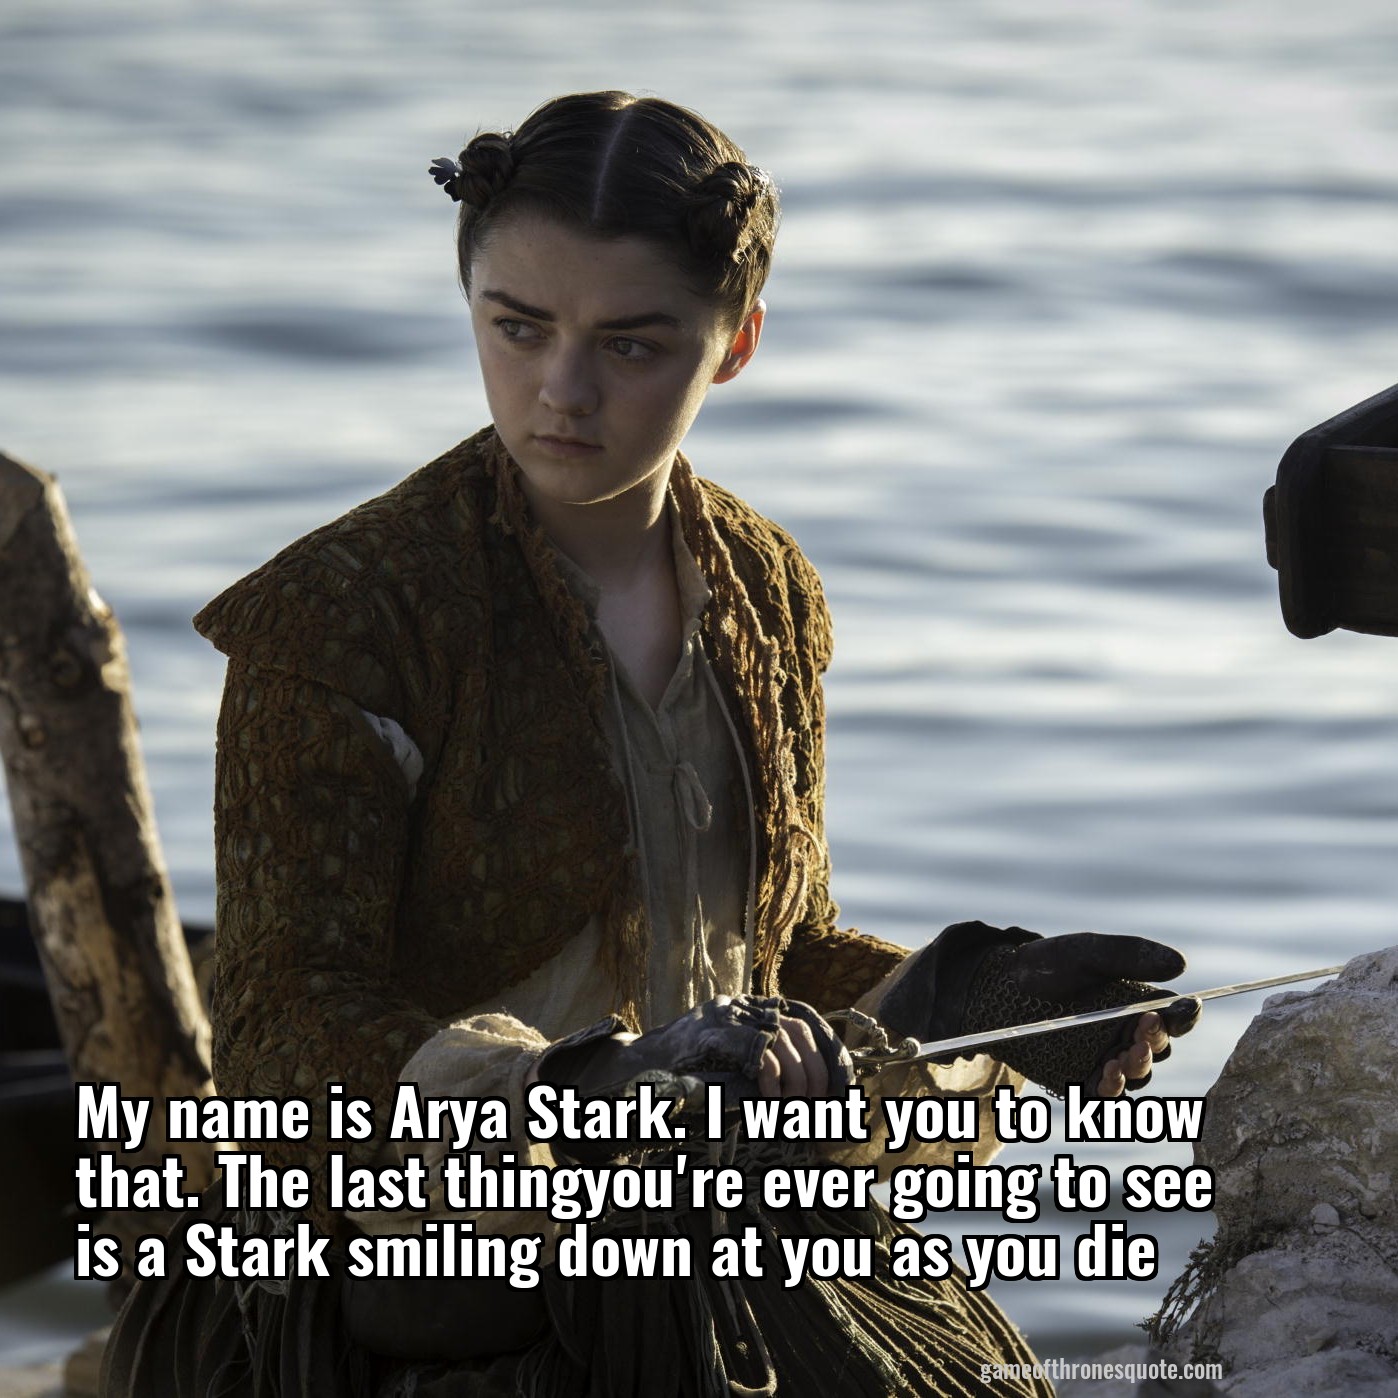 My name is Arya Stark. I want you to know that. The last thingyou're ever going to see is a Stark smiling down at you as you die